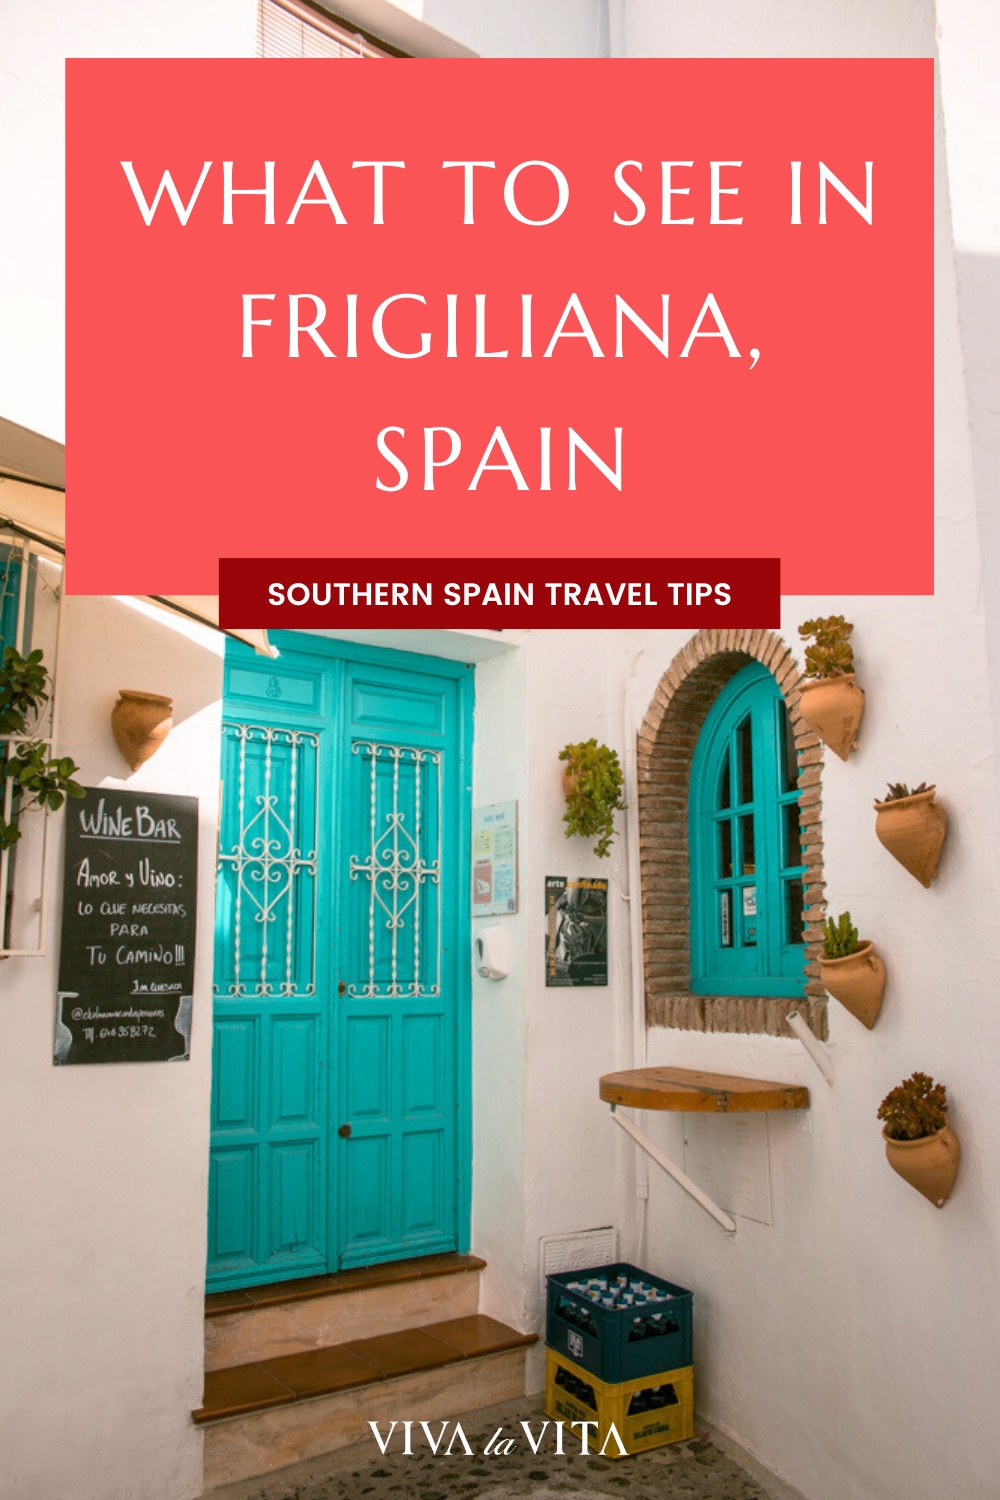 pinterest image showing the village of frigiliana in spain, with a headline - what to see in frigiliana spain, southern spain travel tips